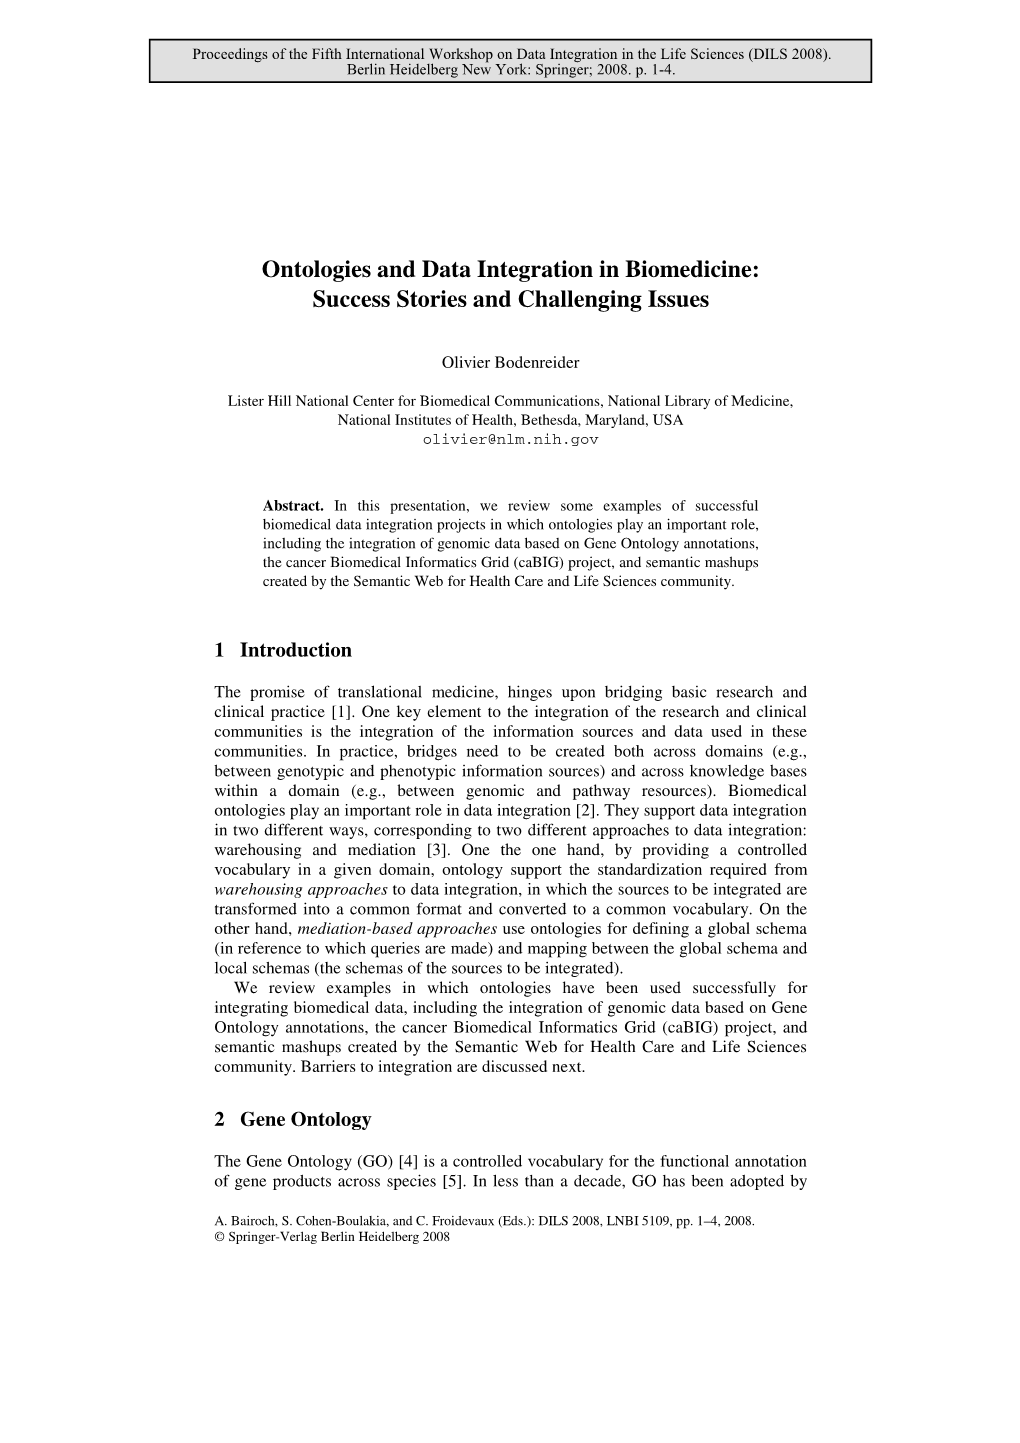 Ontologies and Data Integration in Biomedicine: Success Stories and Challenging Issues